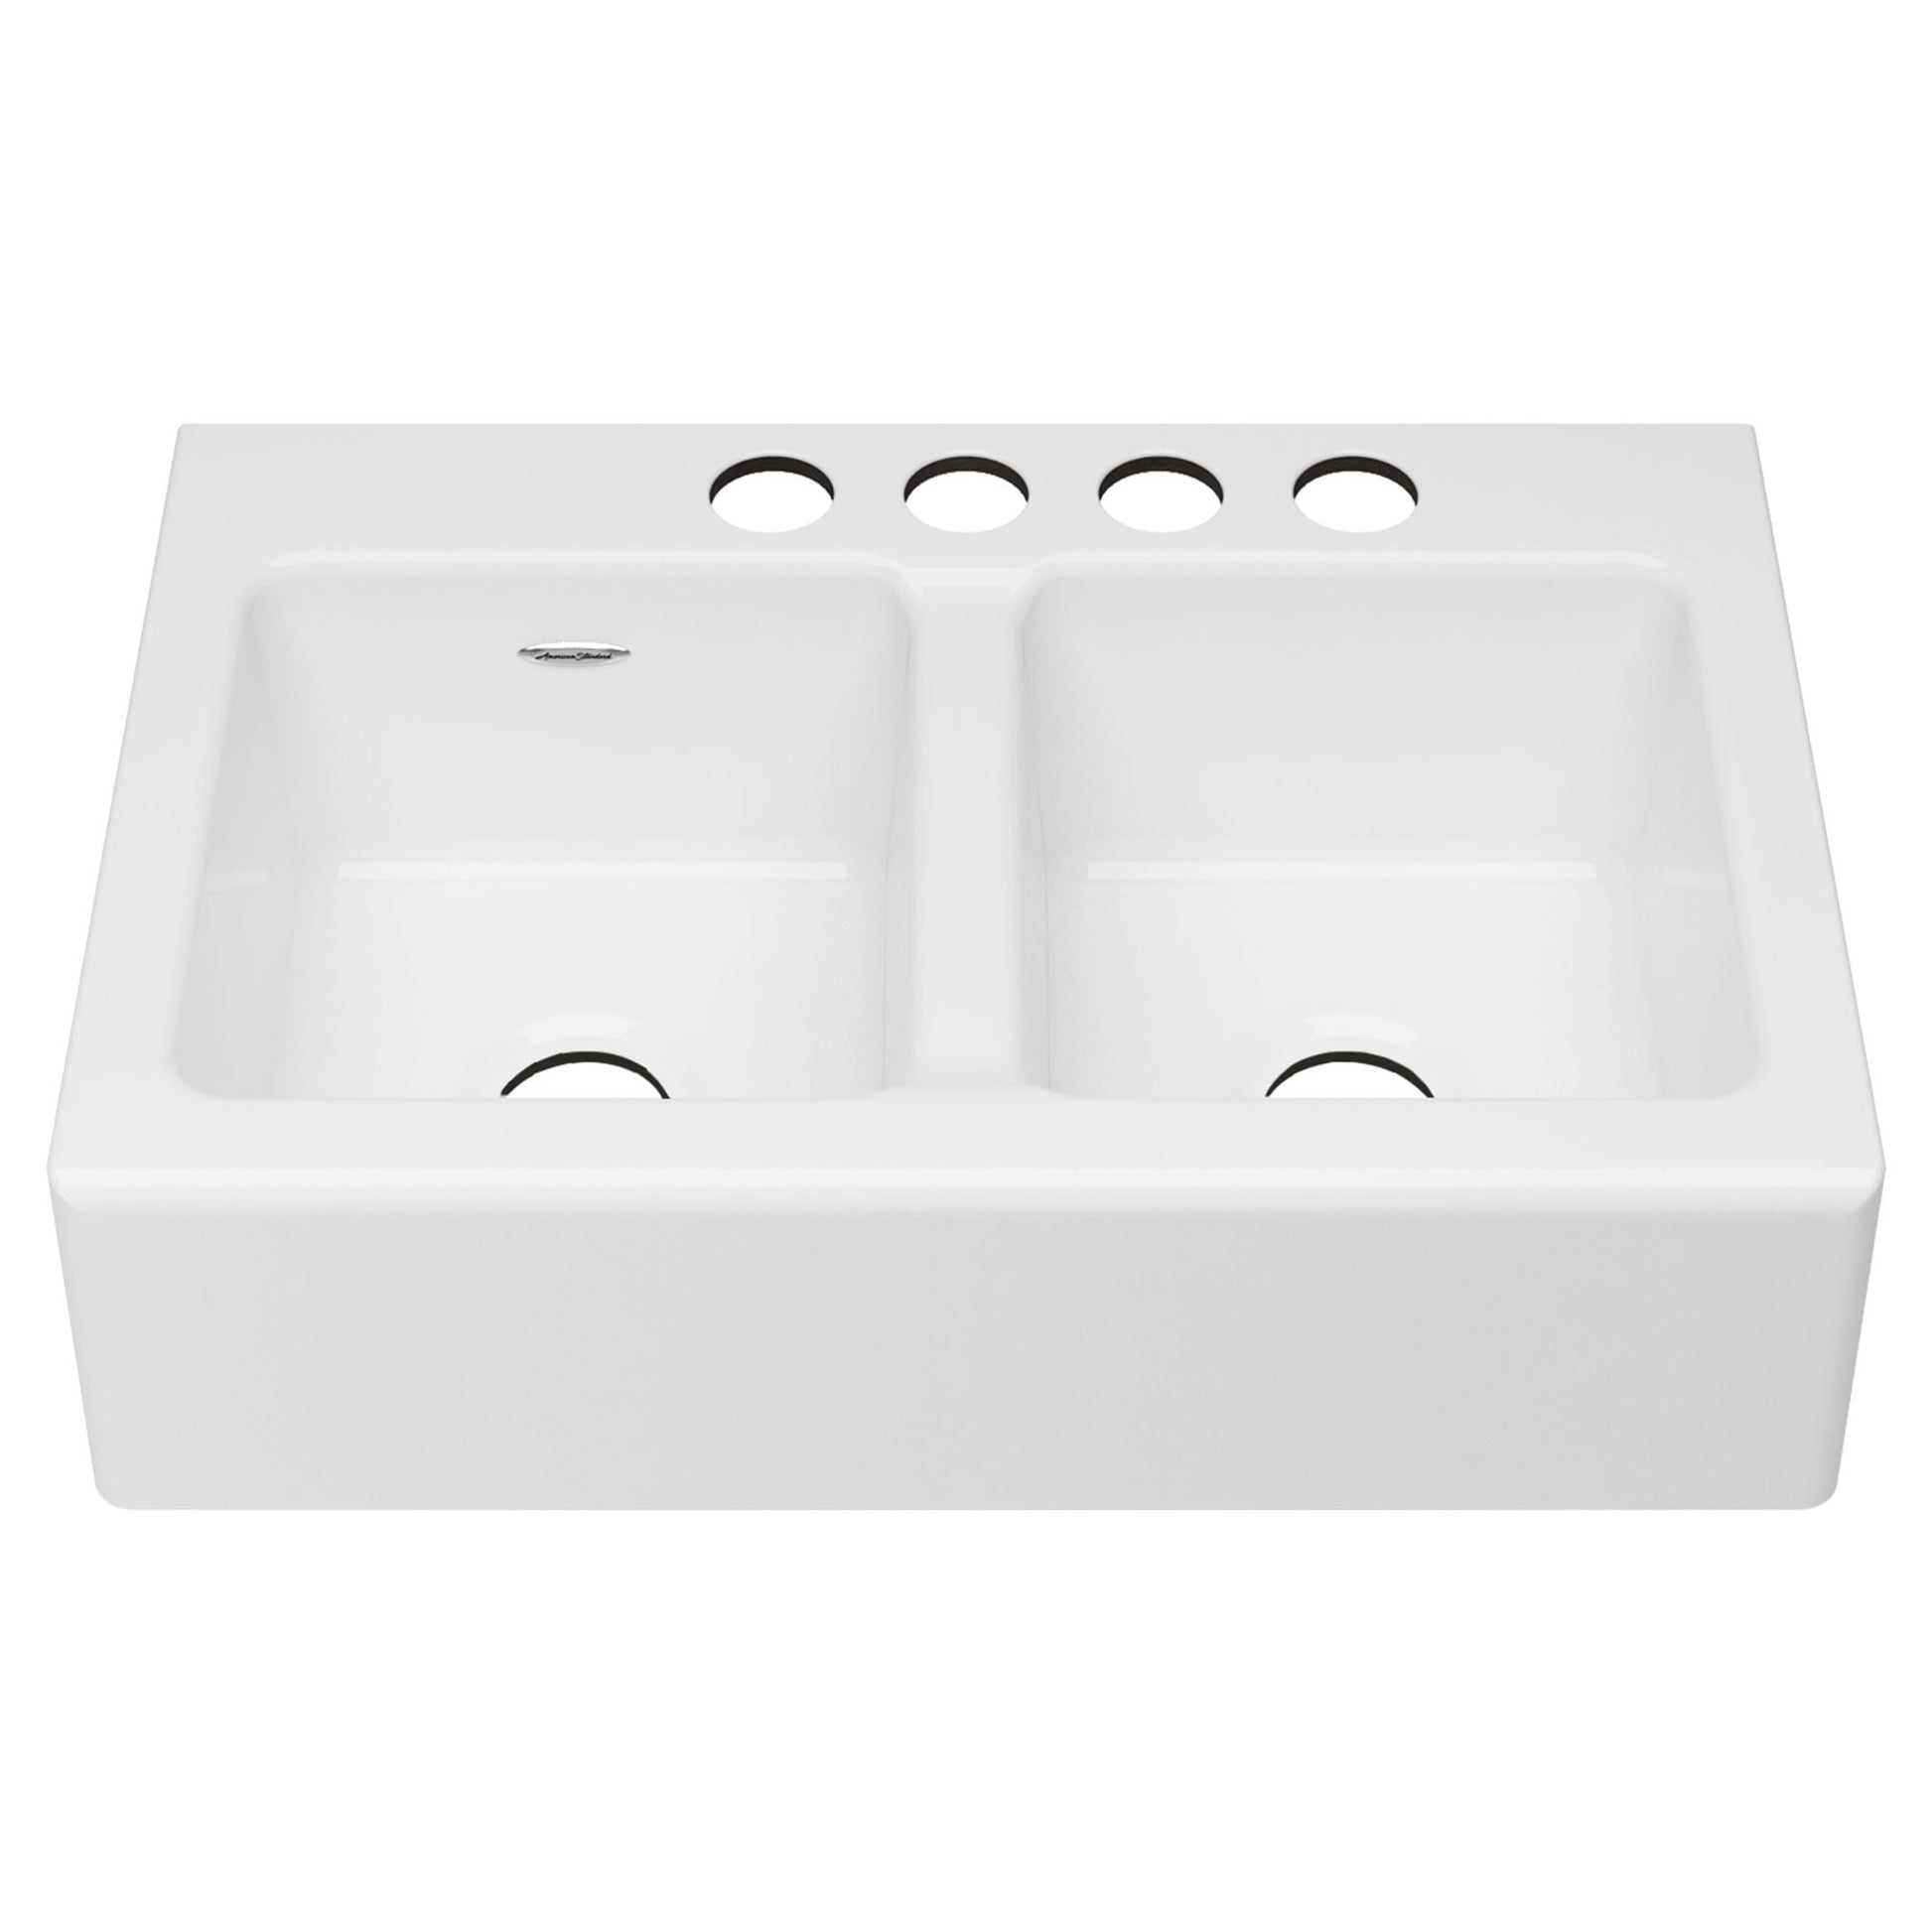 AMERICAN-STANDARD 77DB33220A.308, Delancey 33 x 22-Inch Cast Iron 4-Hole Undermount Double-Bowl Apron Front Kitchen Sink in Brilliant White